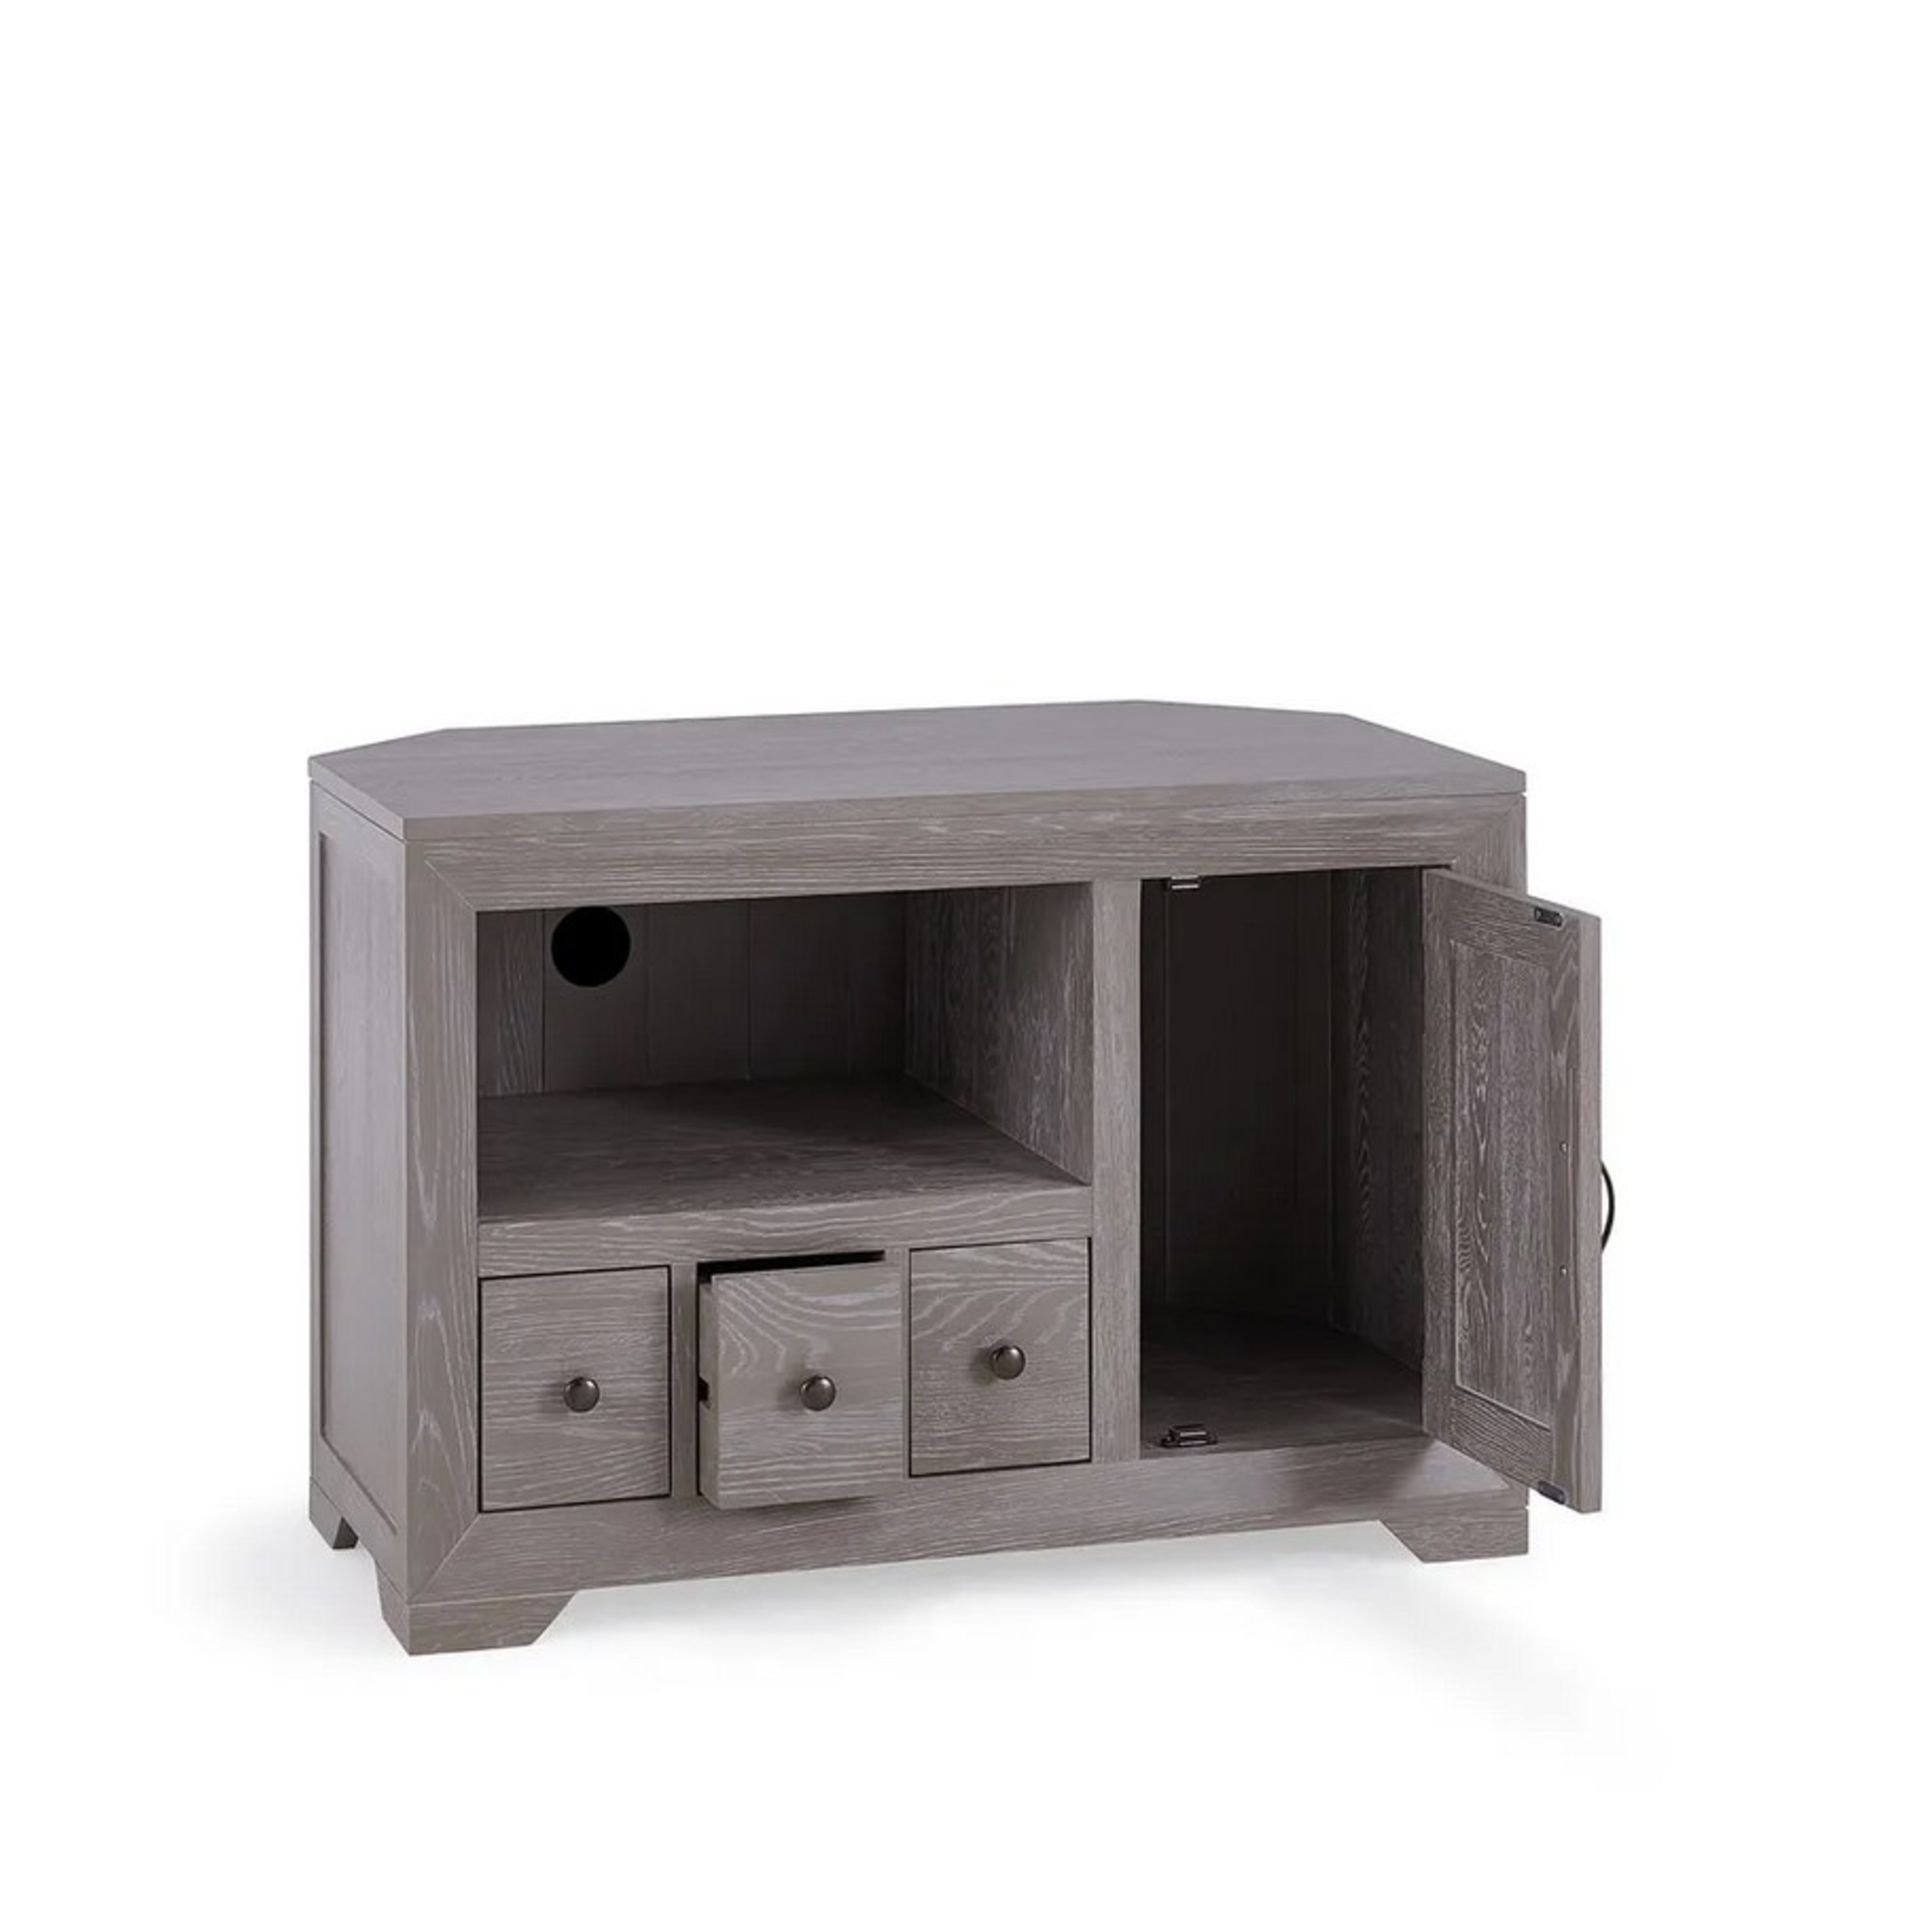 Willow Solid Oak With Grey Wash Corner TV Unit. Dimensions: (H64x W93x D55cm). - Image 4 of 18